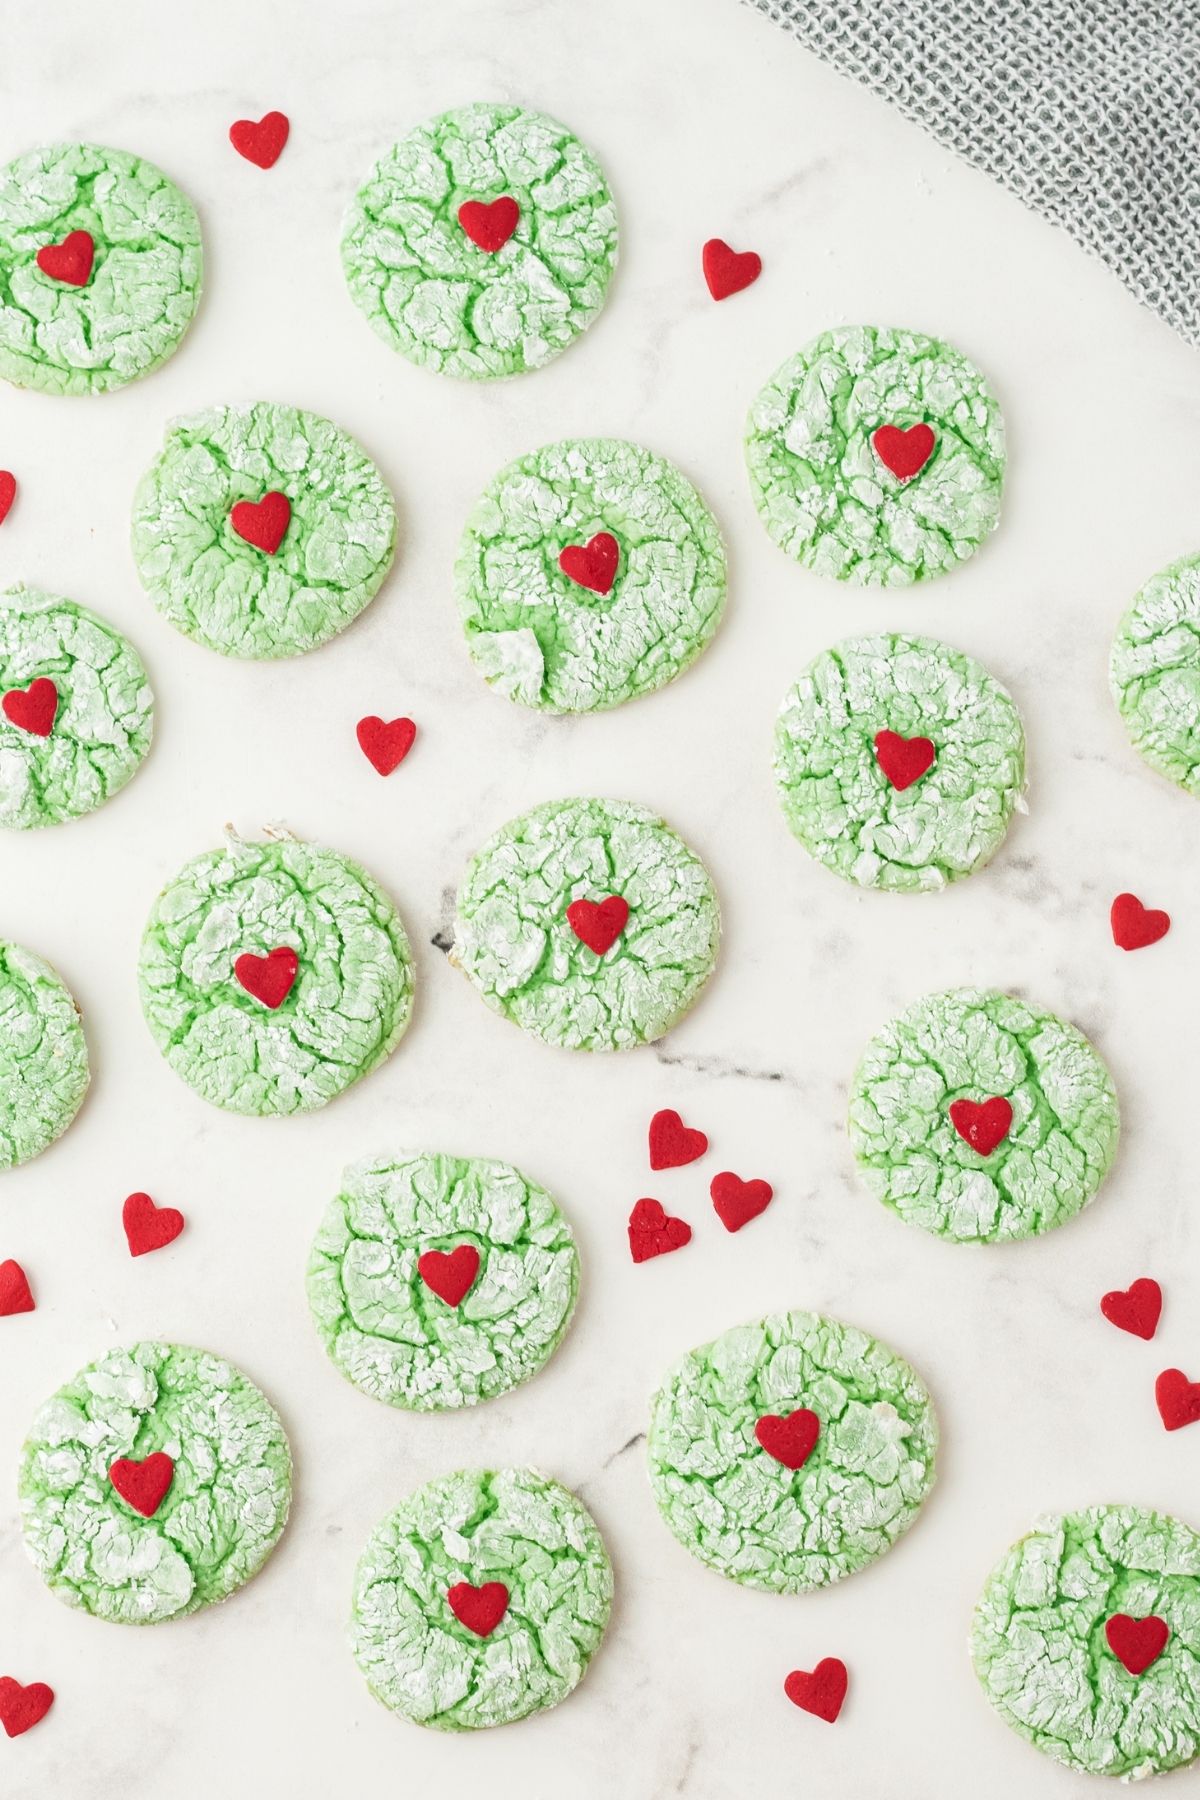 baked green cookies with cracks and a big red heart on white counter